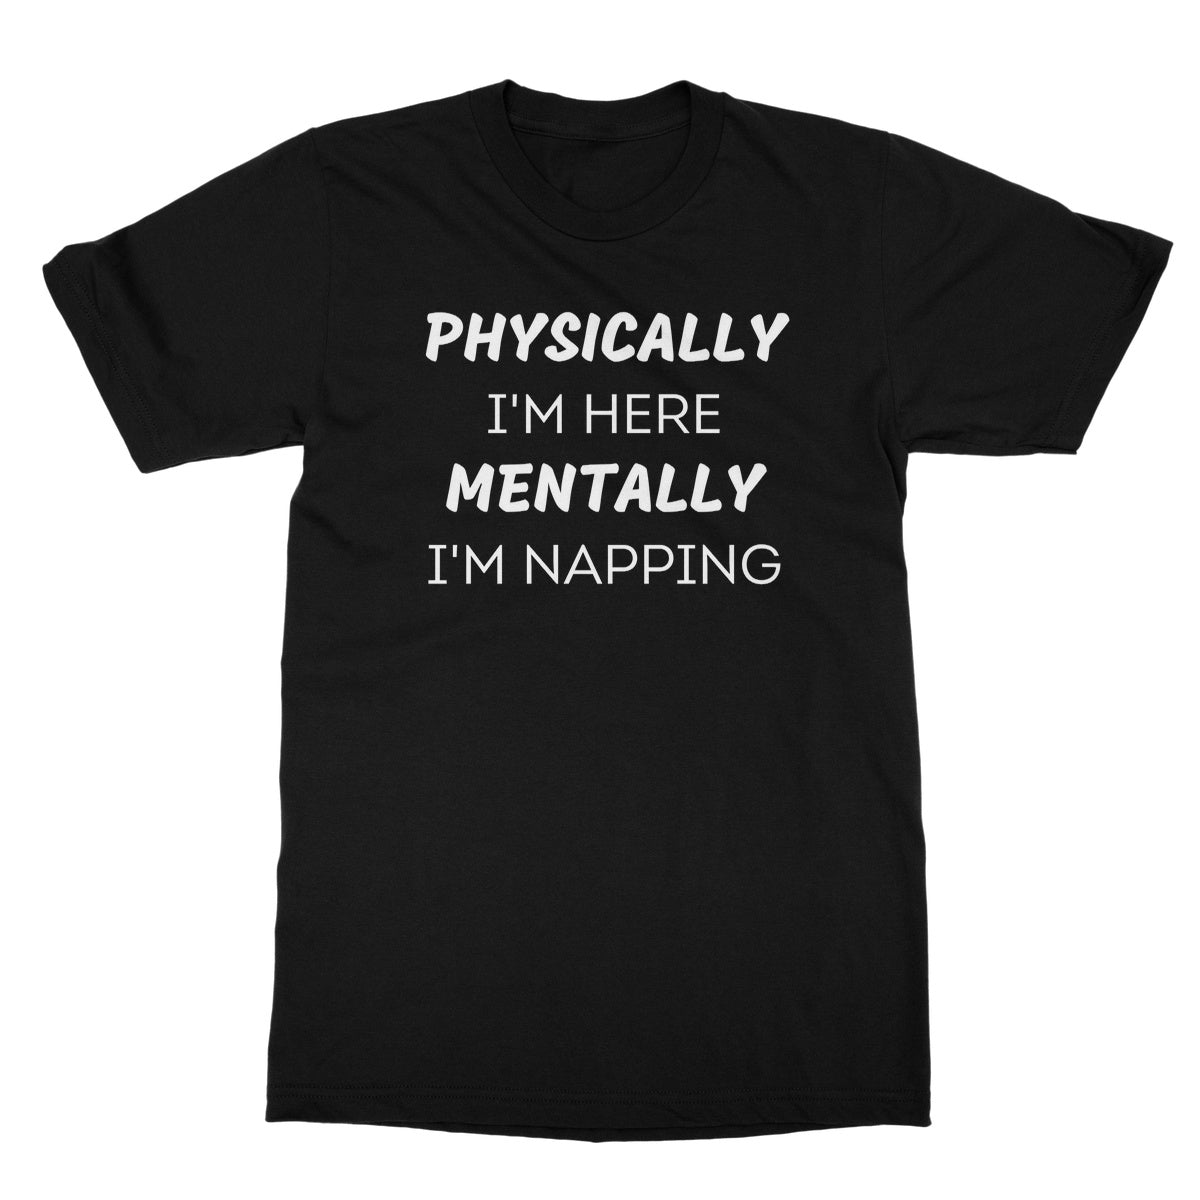 physically here mentally napping t shirt black